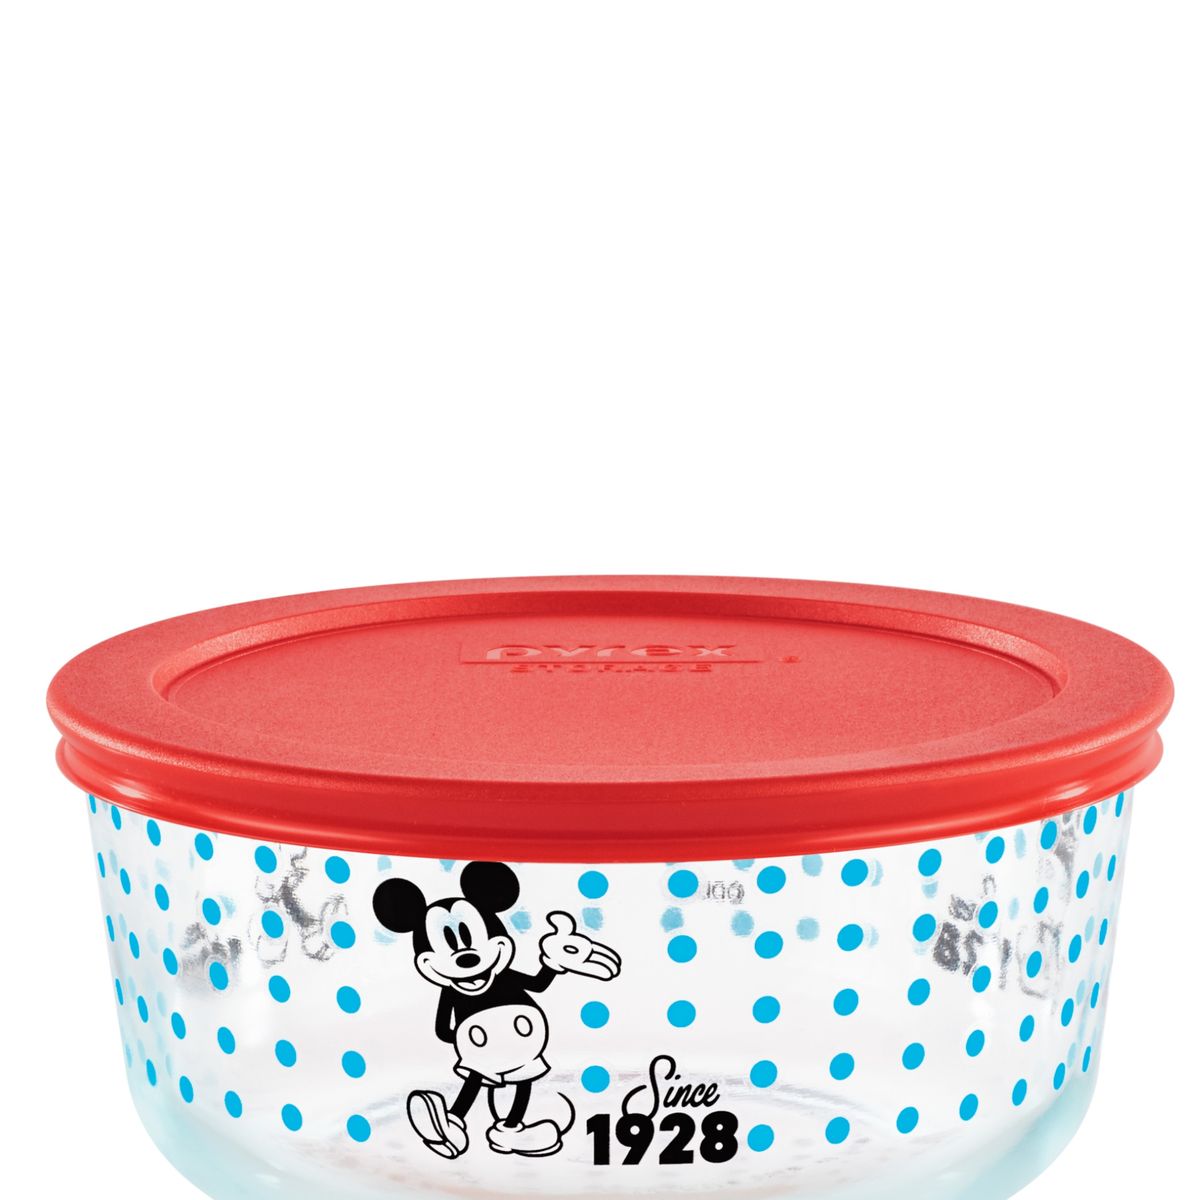 Pyrex's Star Wars-Themed Containers Are Selling Out Fast